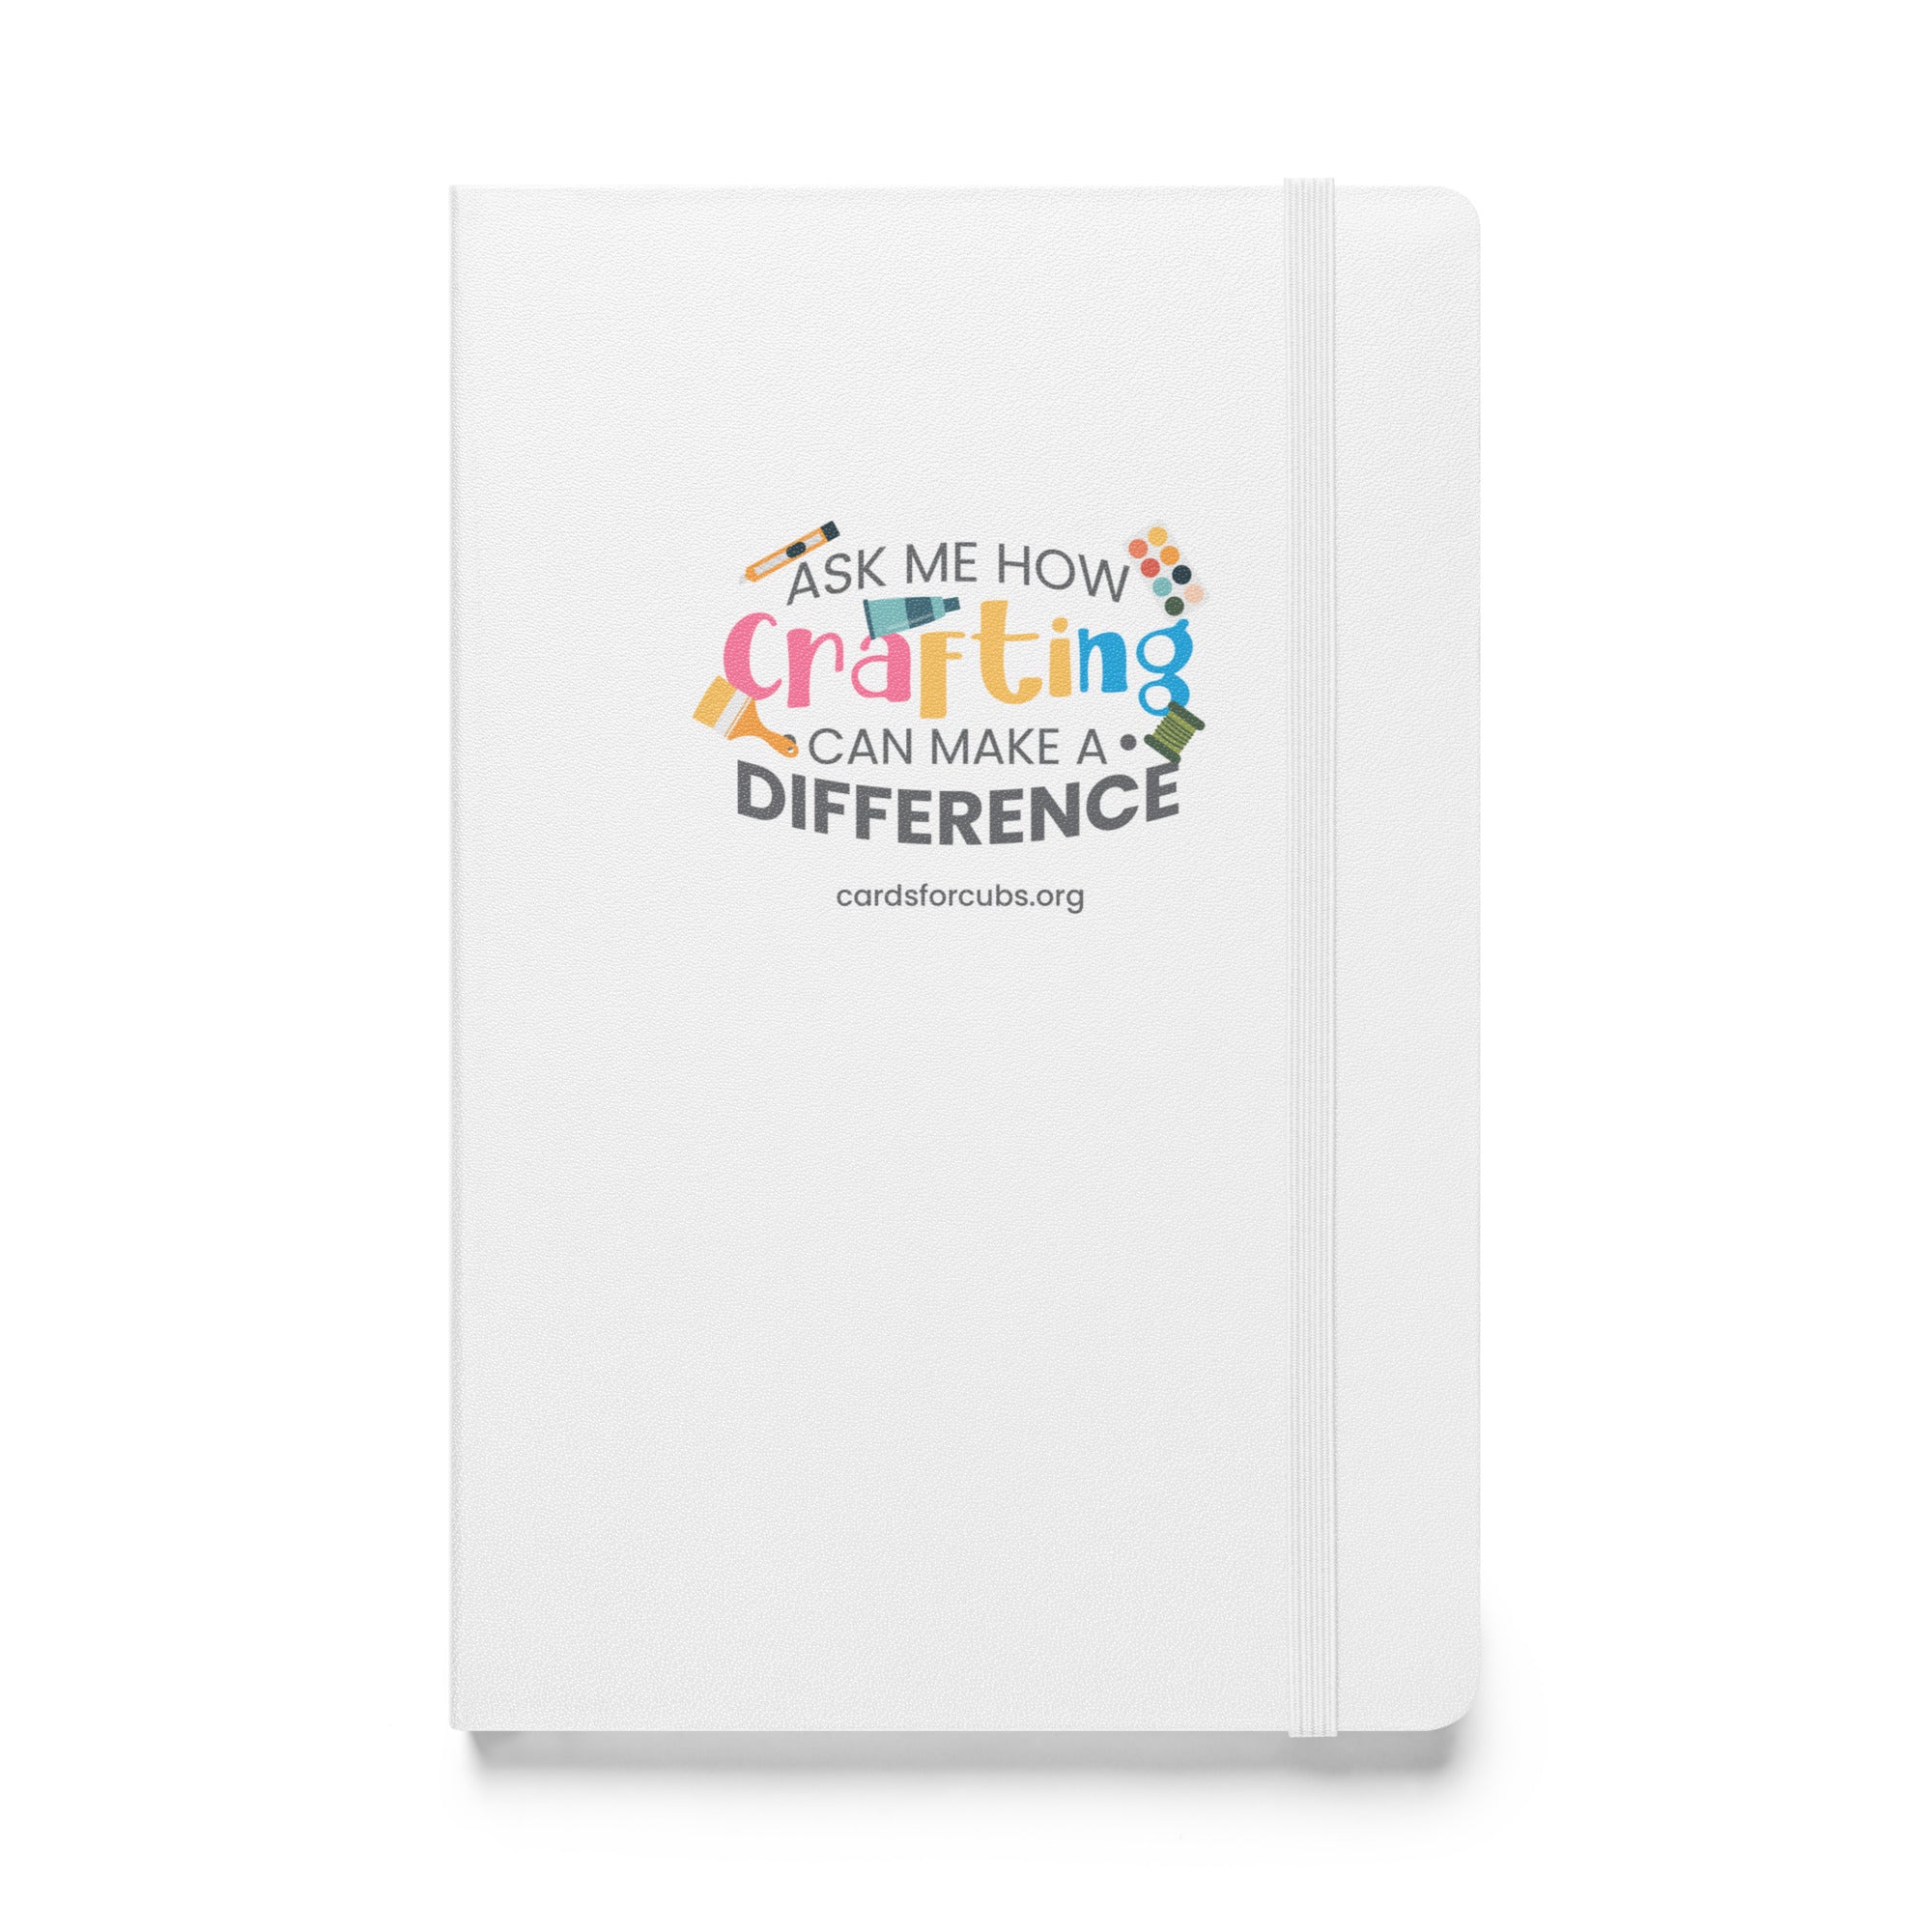 CFC Crafting a Difference Notebook